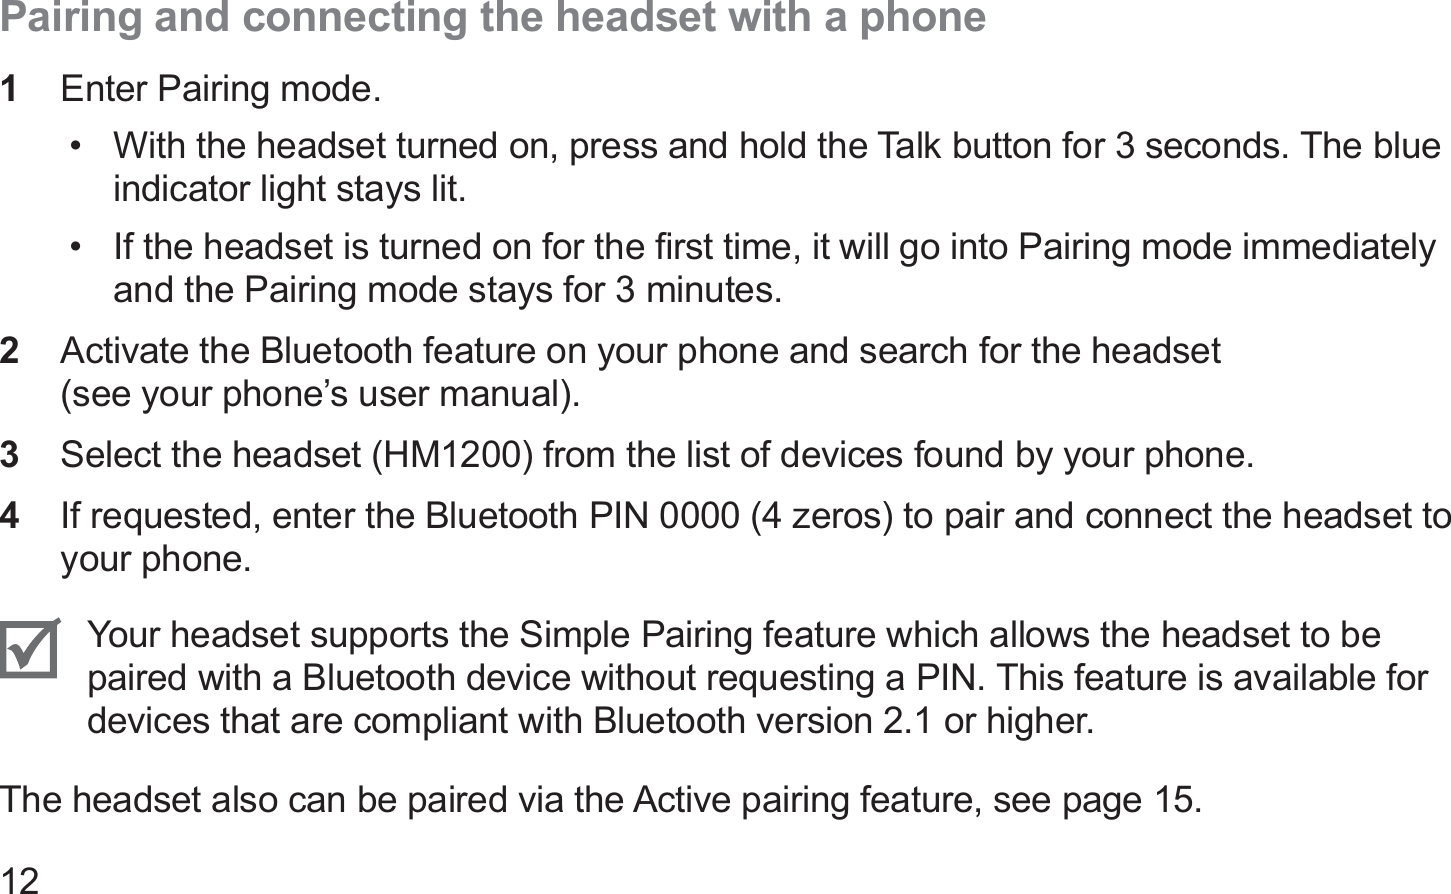 12Pairing and connecting the headset with a phone1  Enter Pairing mode.With the headset turned on, press and hold the Talk button for 3 seconds. The blue • indicator light stays lit.If the headset is turned on for the ﬁrst time, it will go into Pairing mode immediately • and the Pairing mode stays for 3 minutes.Activate the Bluetooth feature on your phone and search for the headset  2 (see your phone’s user manual).Select the headset (HM1200) from the list of devices found by your phone.3 If requested, enter the Bluetooth PIN 0000 (4 zeros) to pair and connect the headset to 4 your phone.Your headset supports the Simple Pairing feature which allows the headset to be paired with a Bluetooth device without requesting a PIN. This feature is available for devices that are compliant with Bluetooth version 2.1 or higher.The headset also can be paired via the Active pairing feature, see page 15.